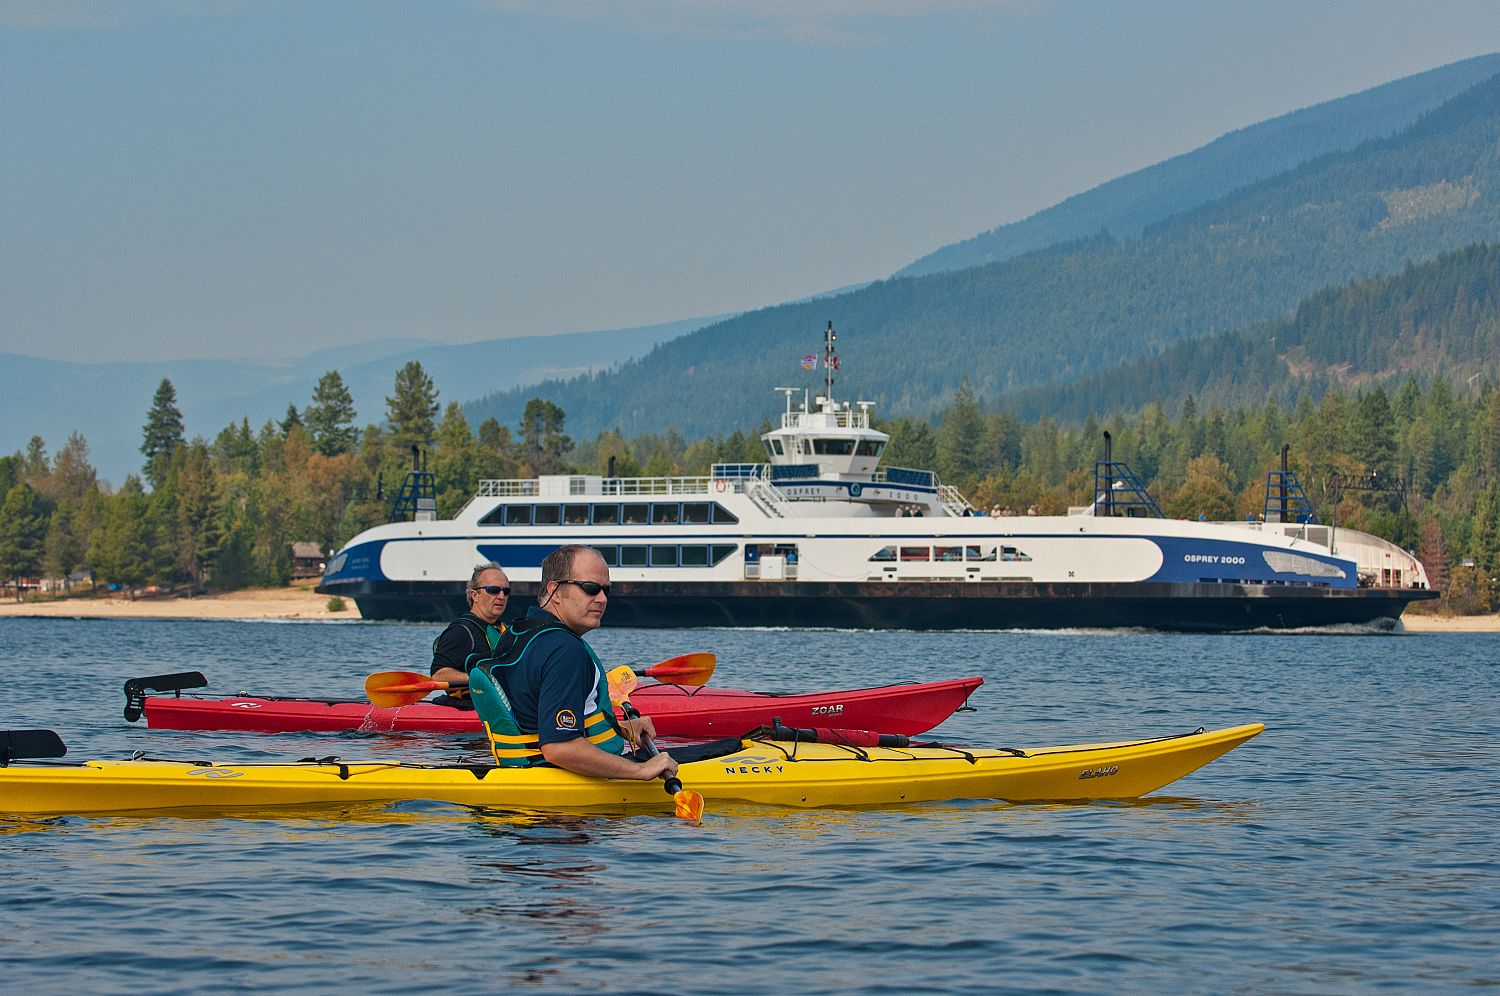 Photo by David Gluns of people kayaking in front of the Kootenay Lake ferry